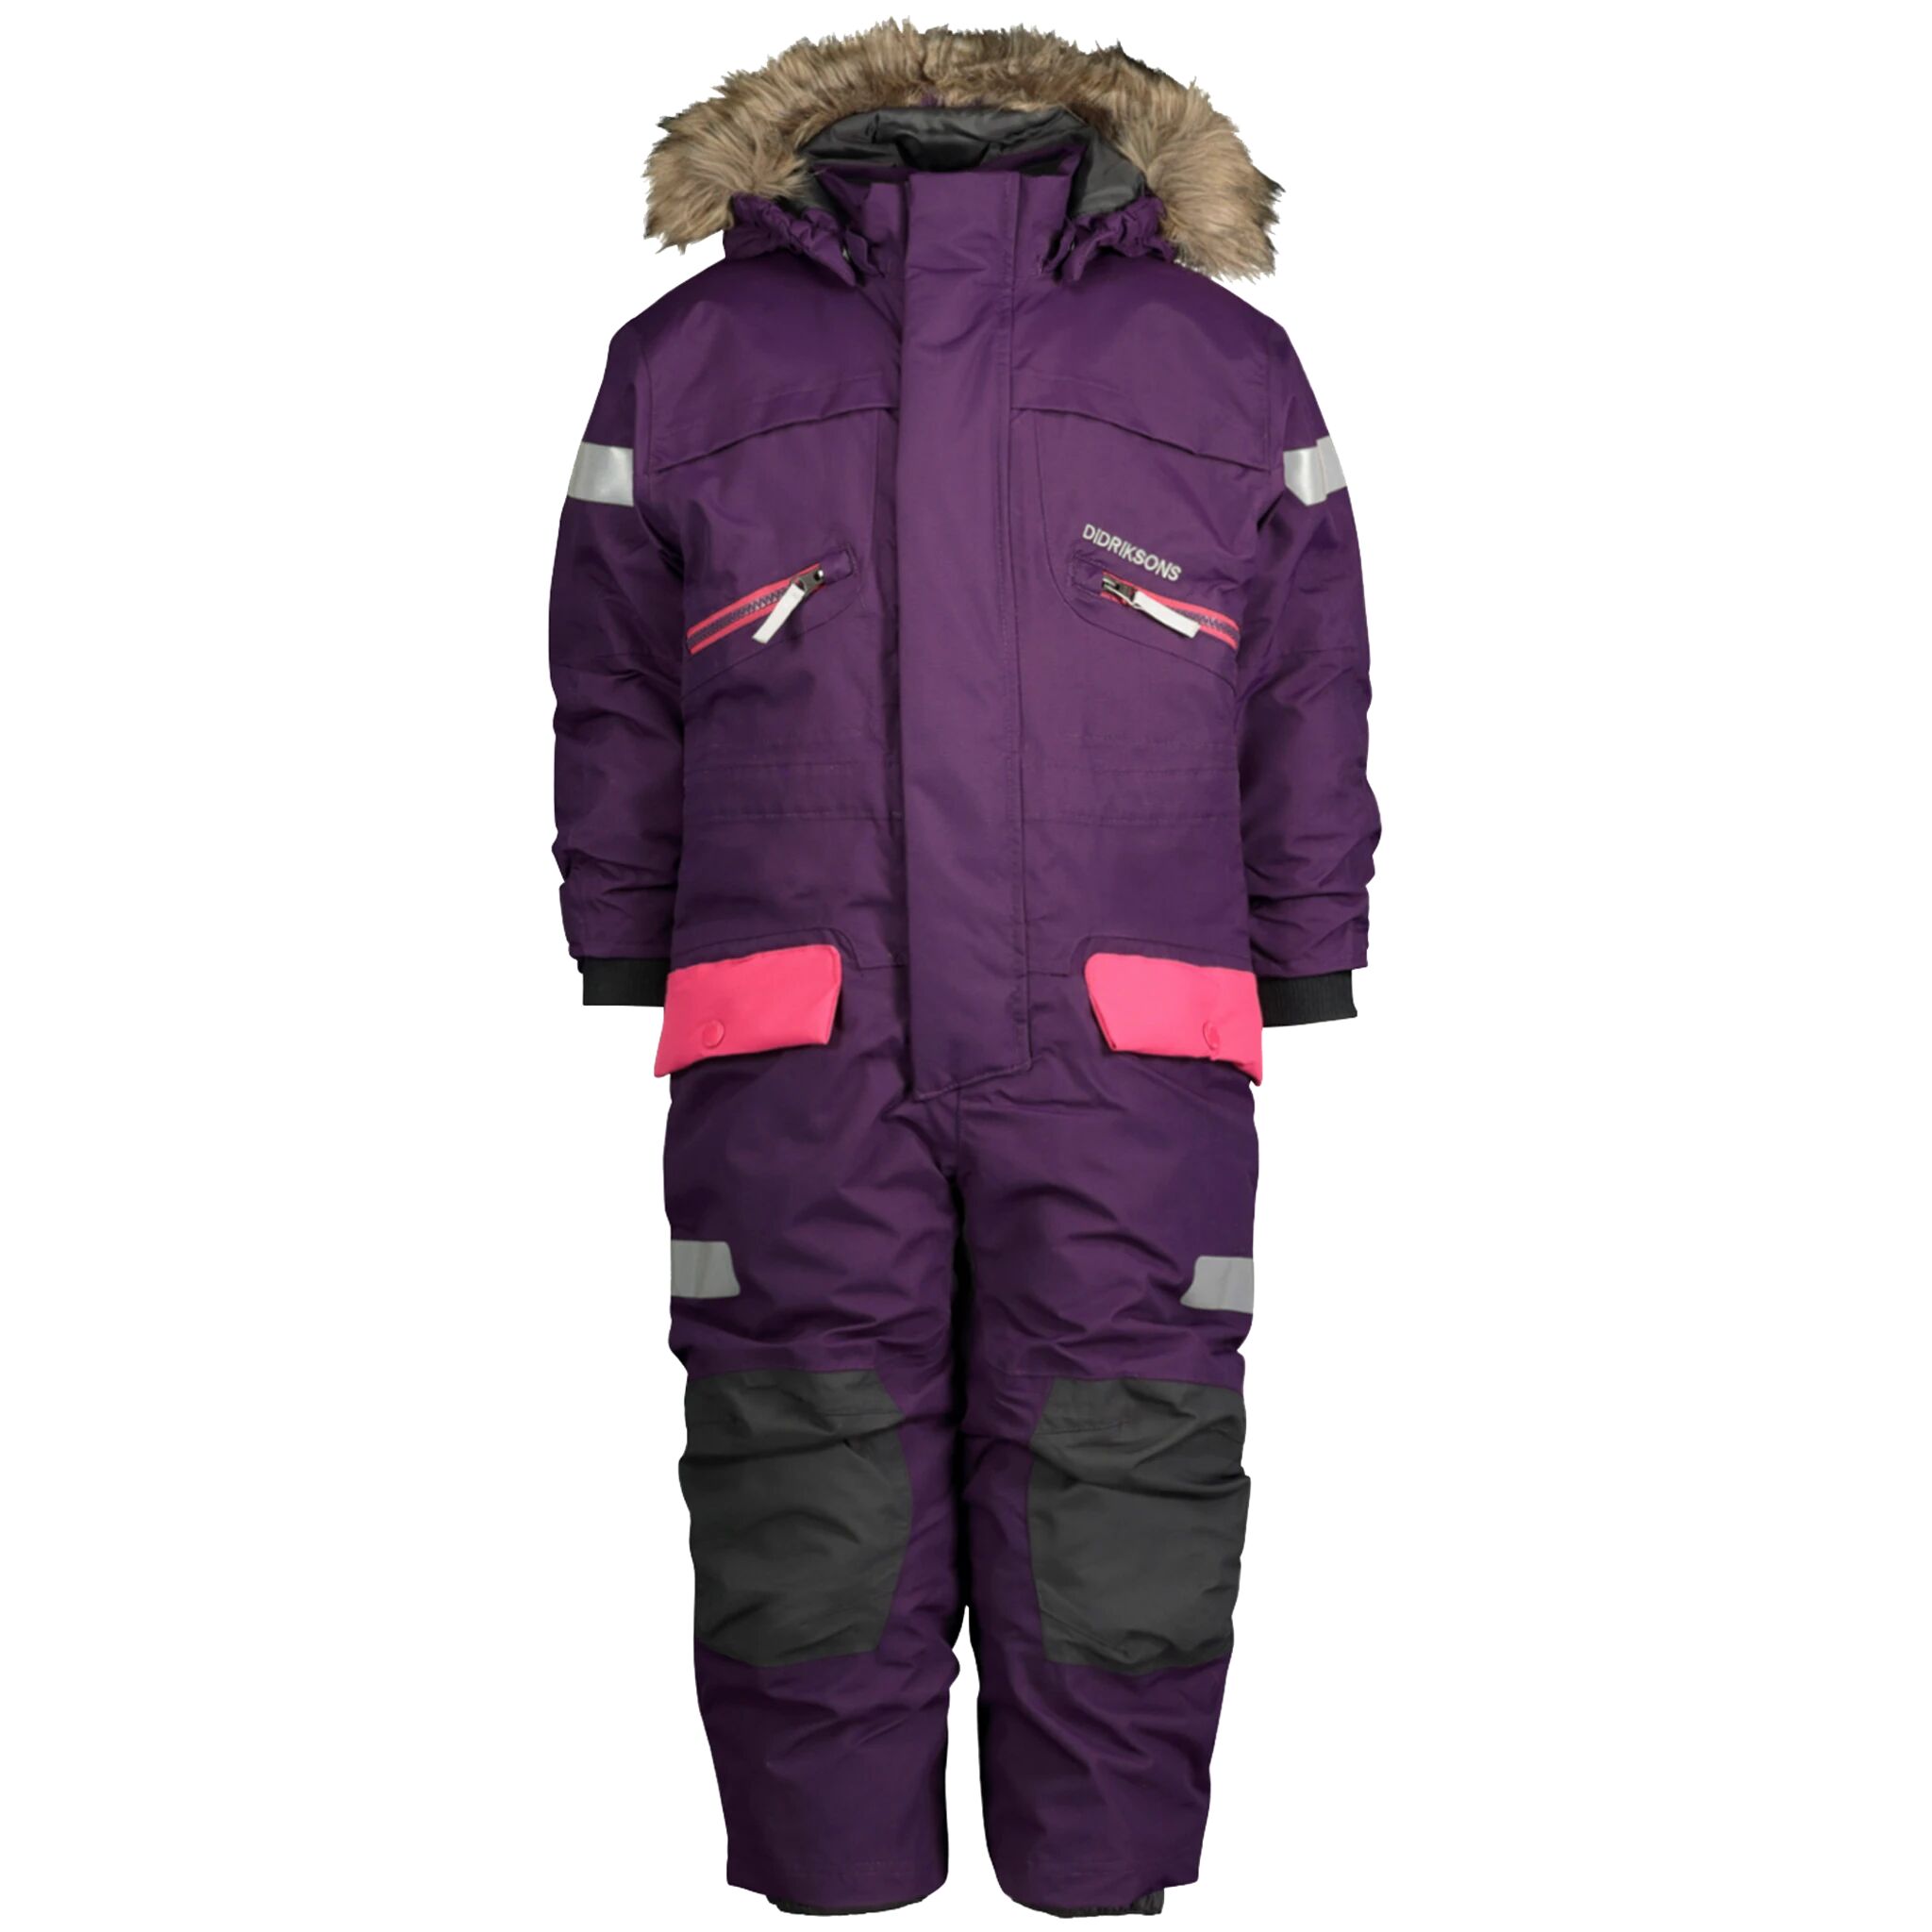 Didriksons Theron 2 Coverall, vinterdress barn 80 Violet